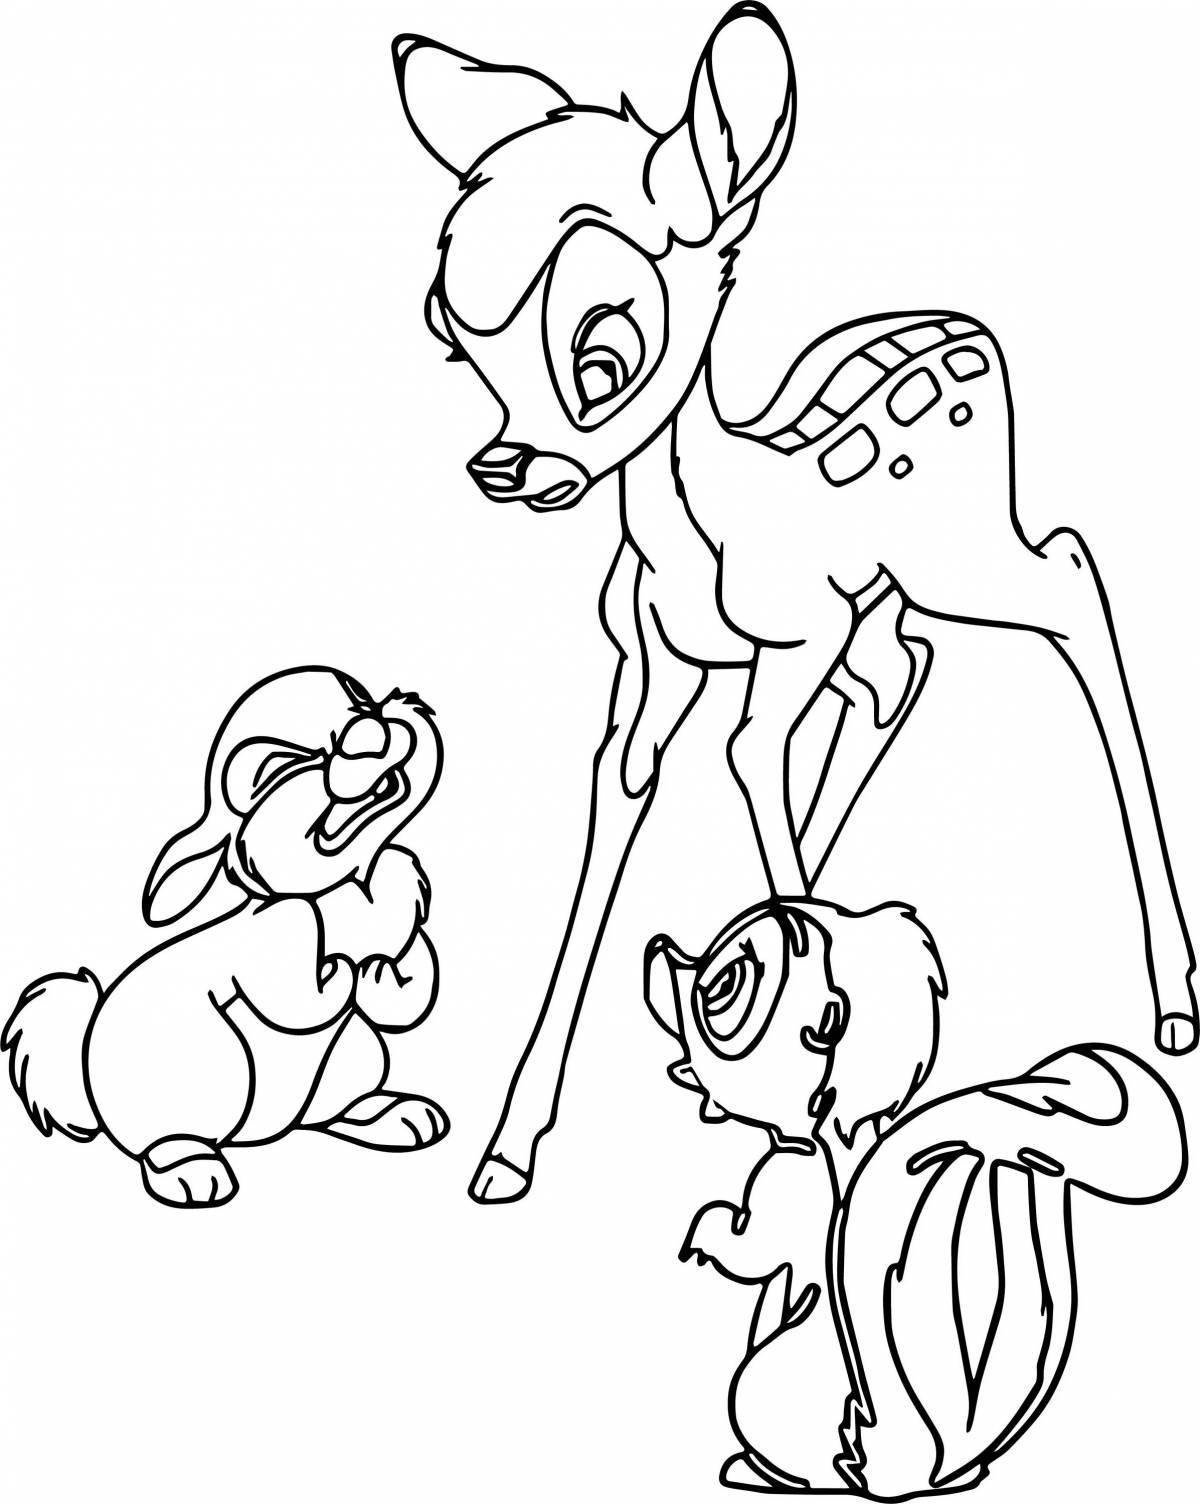 Great bambi coloring book for kids 3-4 years old